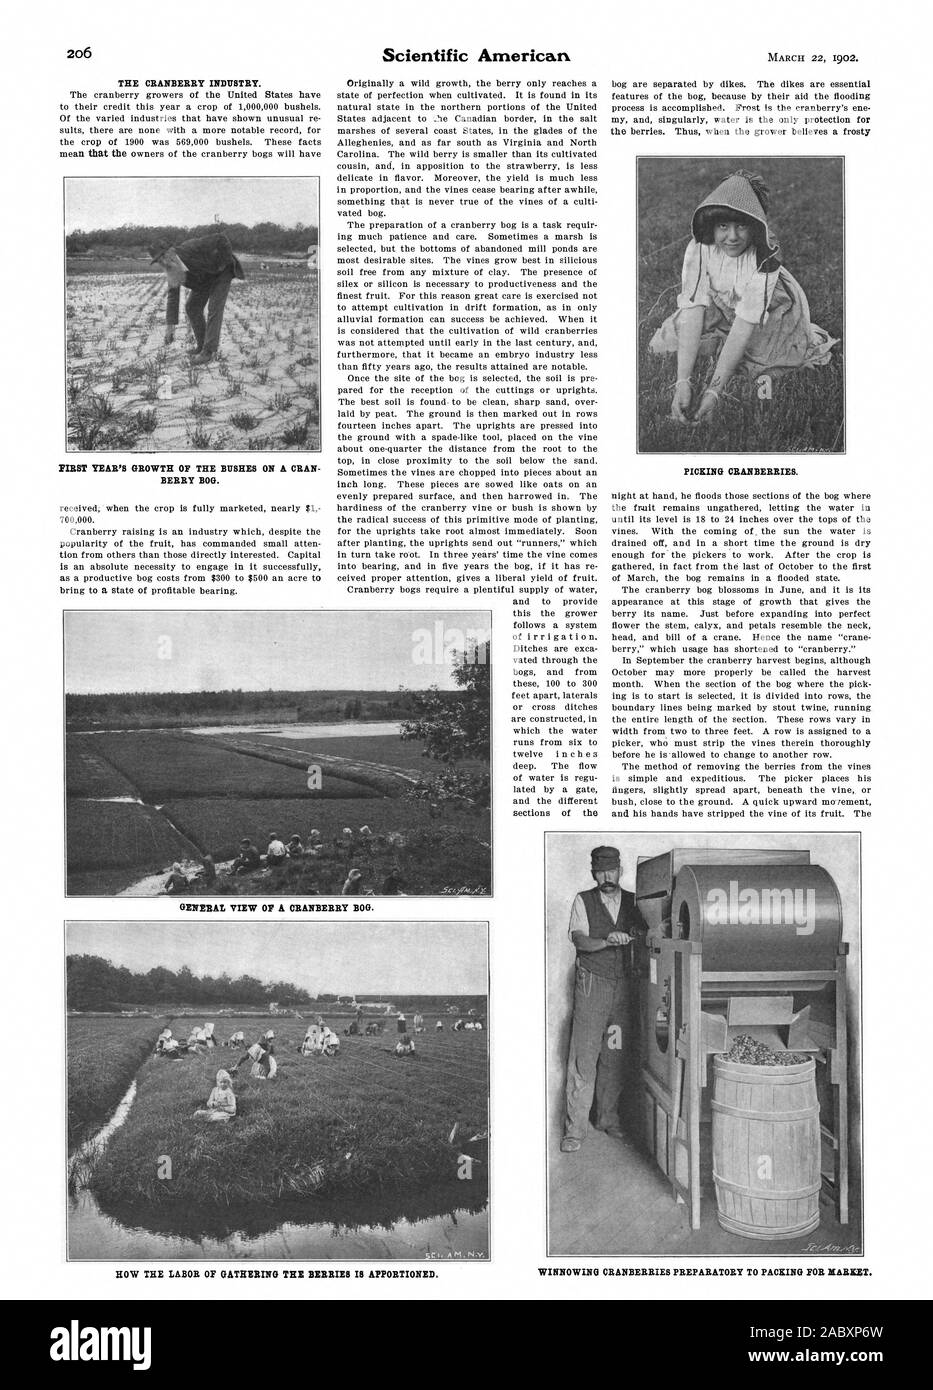 THE CRANBERRY INDUSTRY. FIRST YEAR'S GROWTH OF THE BUSHES ON A CRAN BERRY BOG. PICKING CRANBERRIES. GENERAL VIEW OF A CRANBERRY BOG. HOW THE LABOR OF GATHERING THE BERRIES IS APPORTIONED. WINNOWING CRANBERRIES PREPARATORY TO PACKING FOR MARKET., scientific american, 1902-03-22 Stock Photo